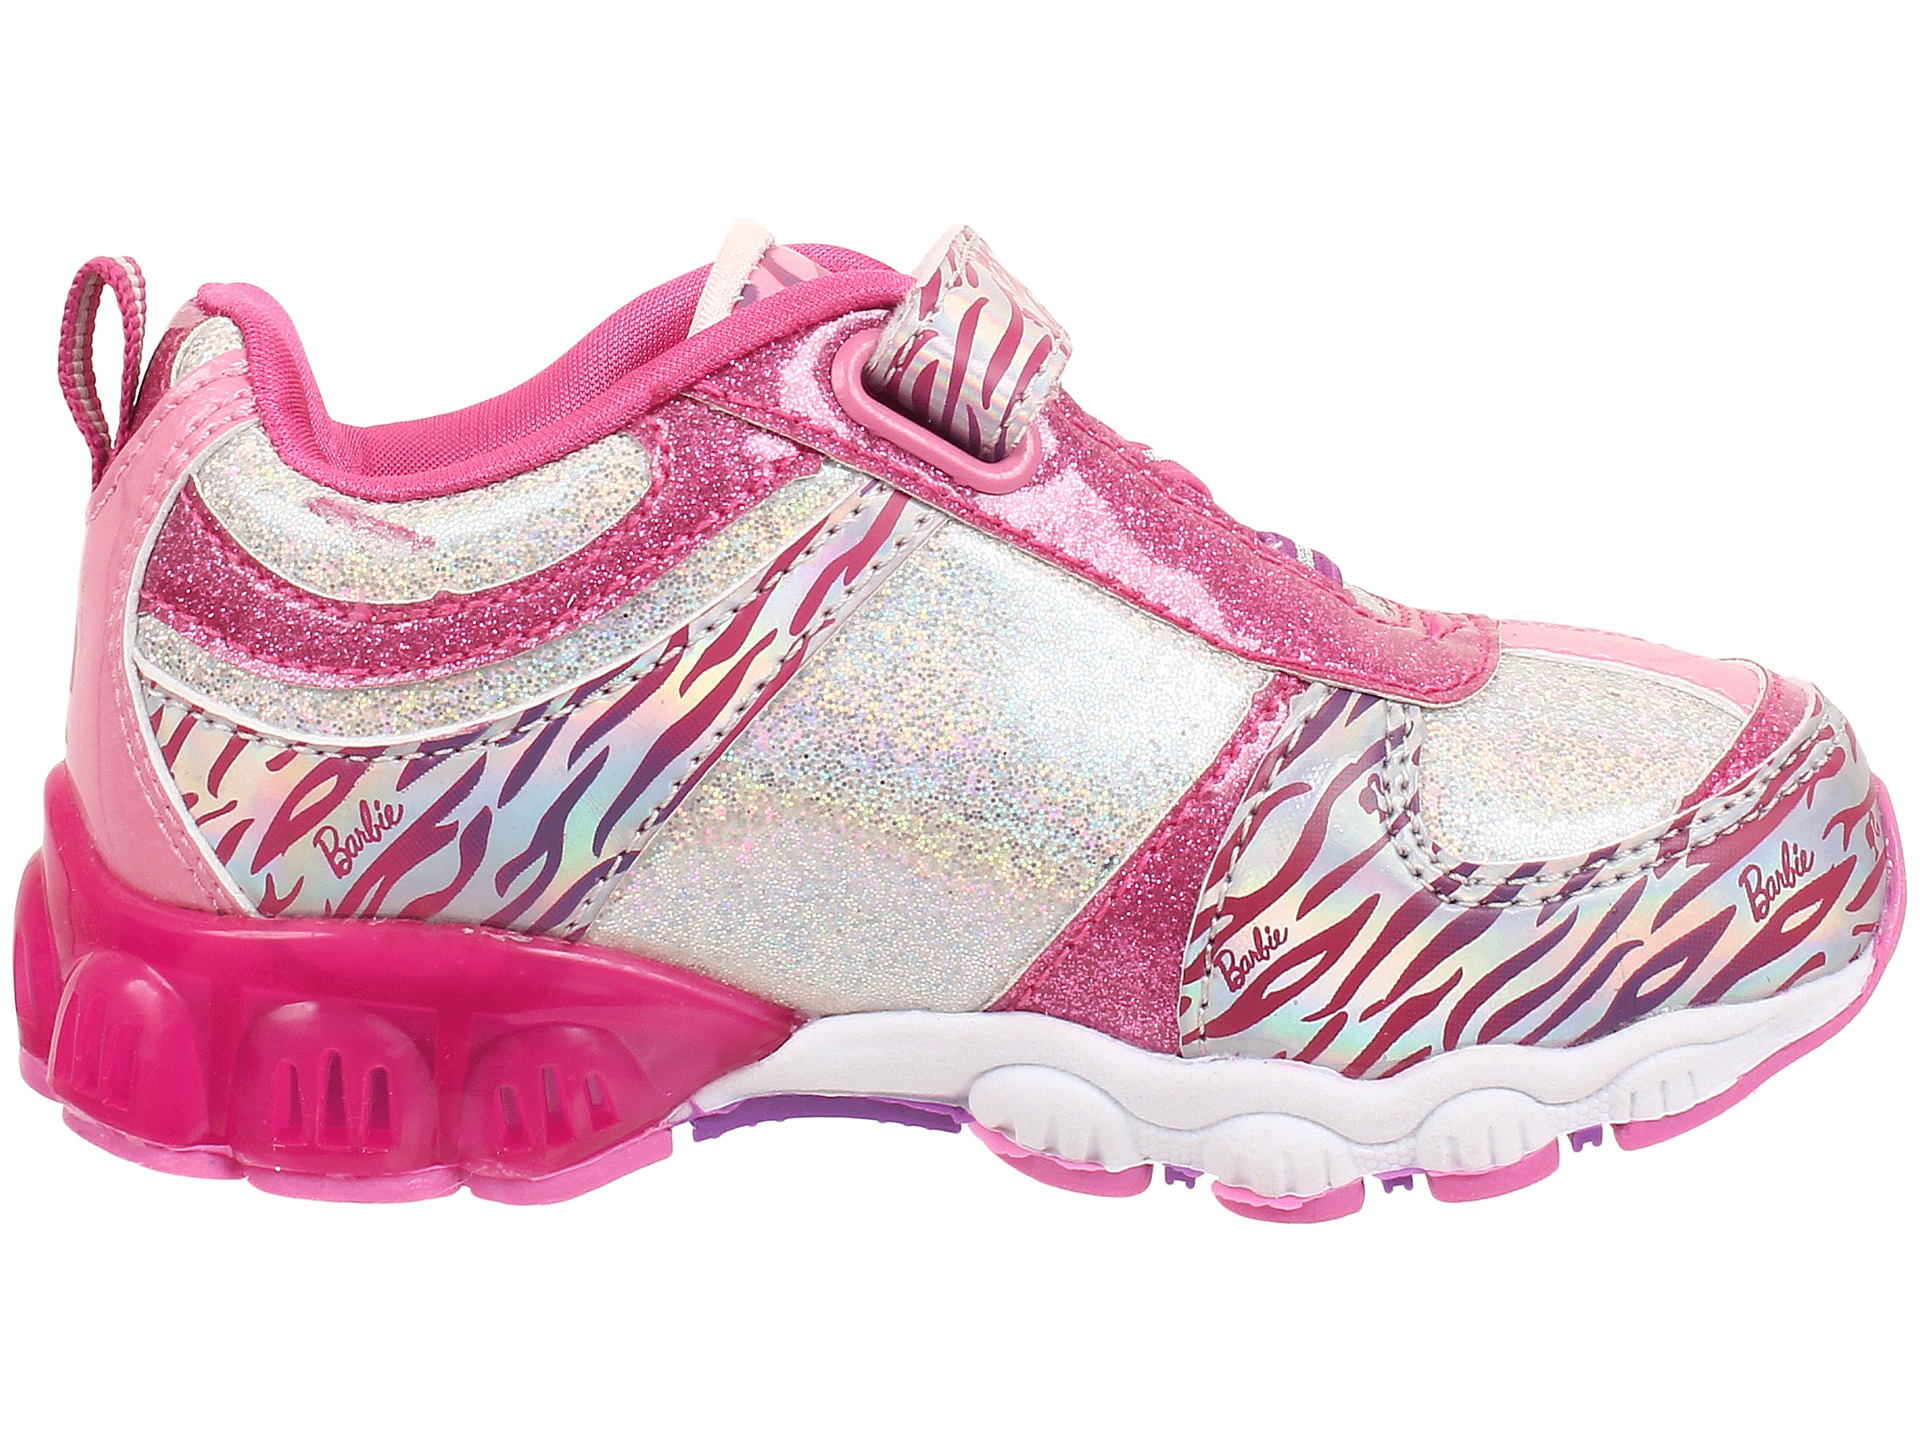 Favorite Characters Barbie 1bbf307 Lighted Shoe Toddler Little Kid White Pink